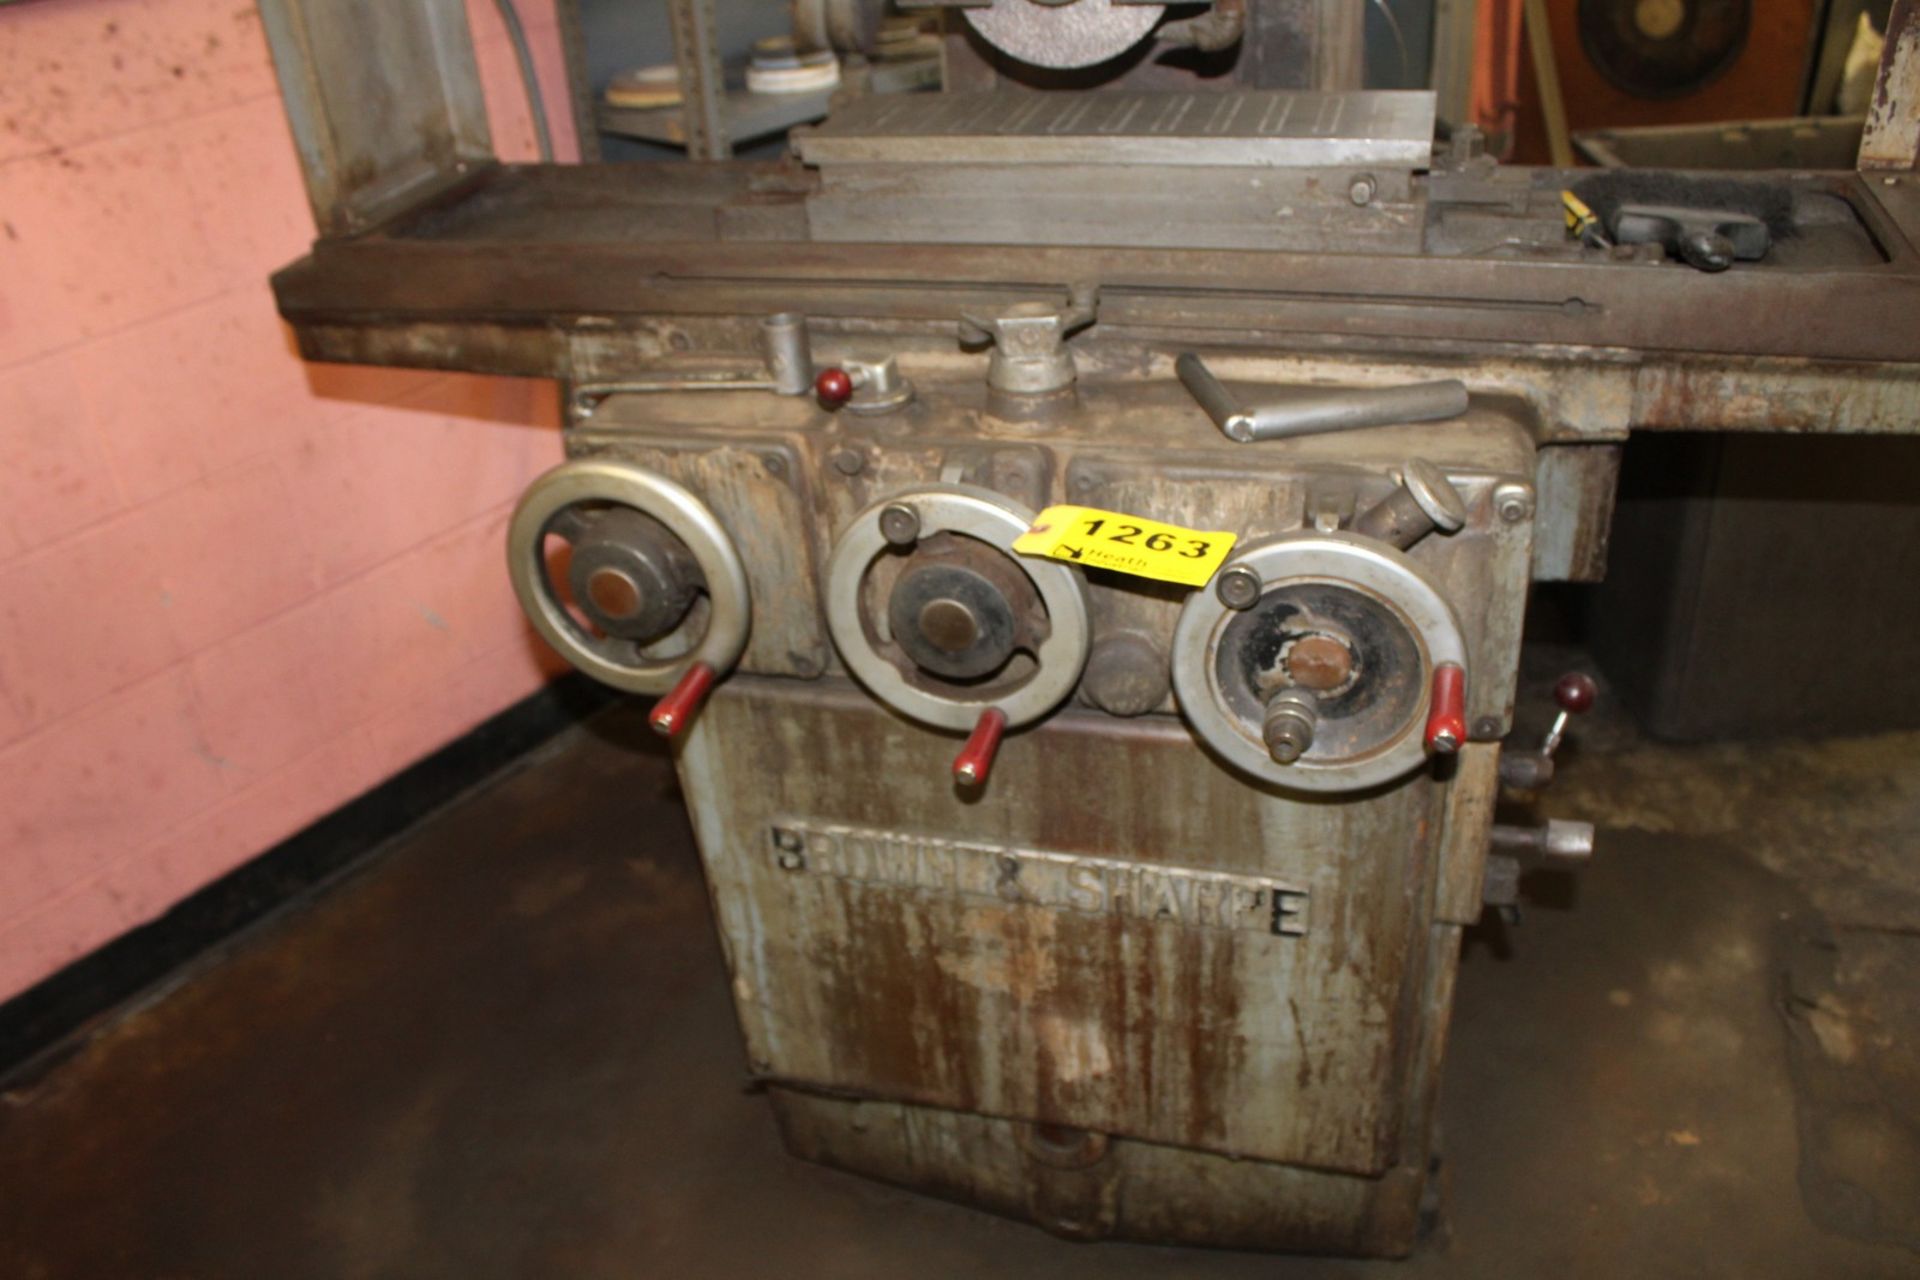 BROWN & SHARPE NO. 618 HYDRAULIC SURFACE GRINDER: S/N 523-6181-159; 6” X 18” PERMANENT MAGNETIC - Image 5 of 5